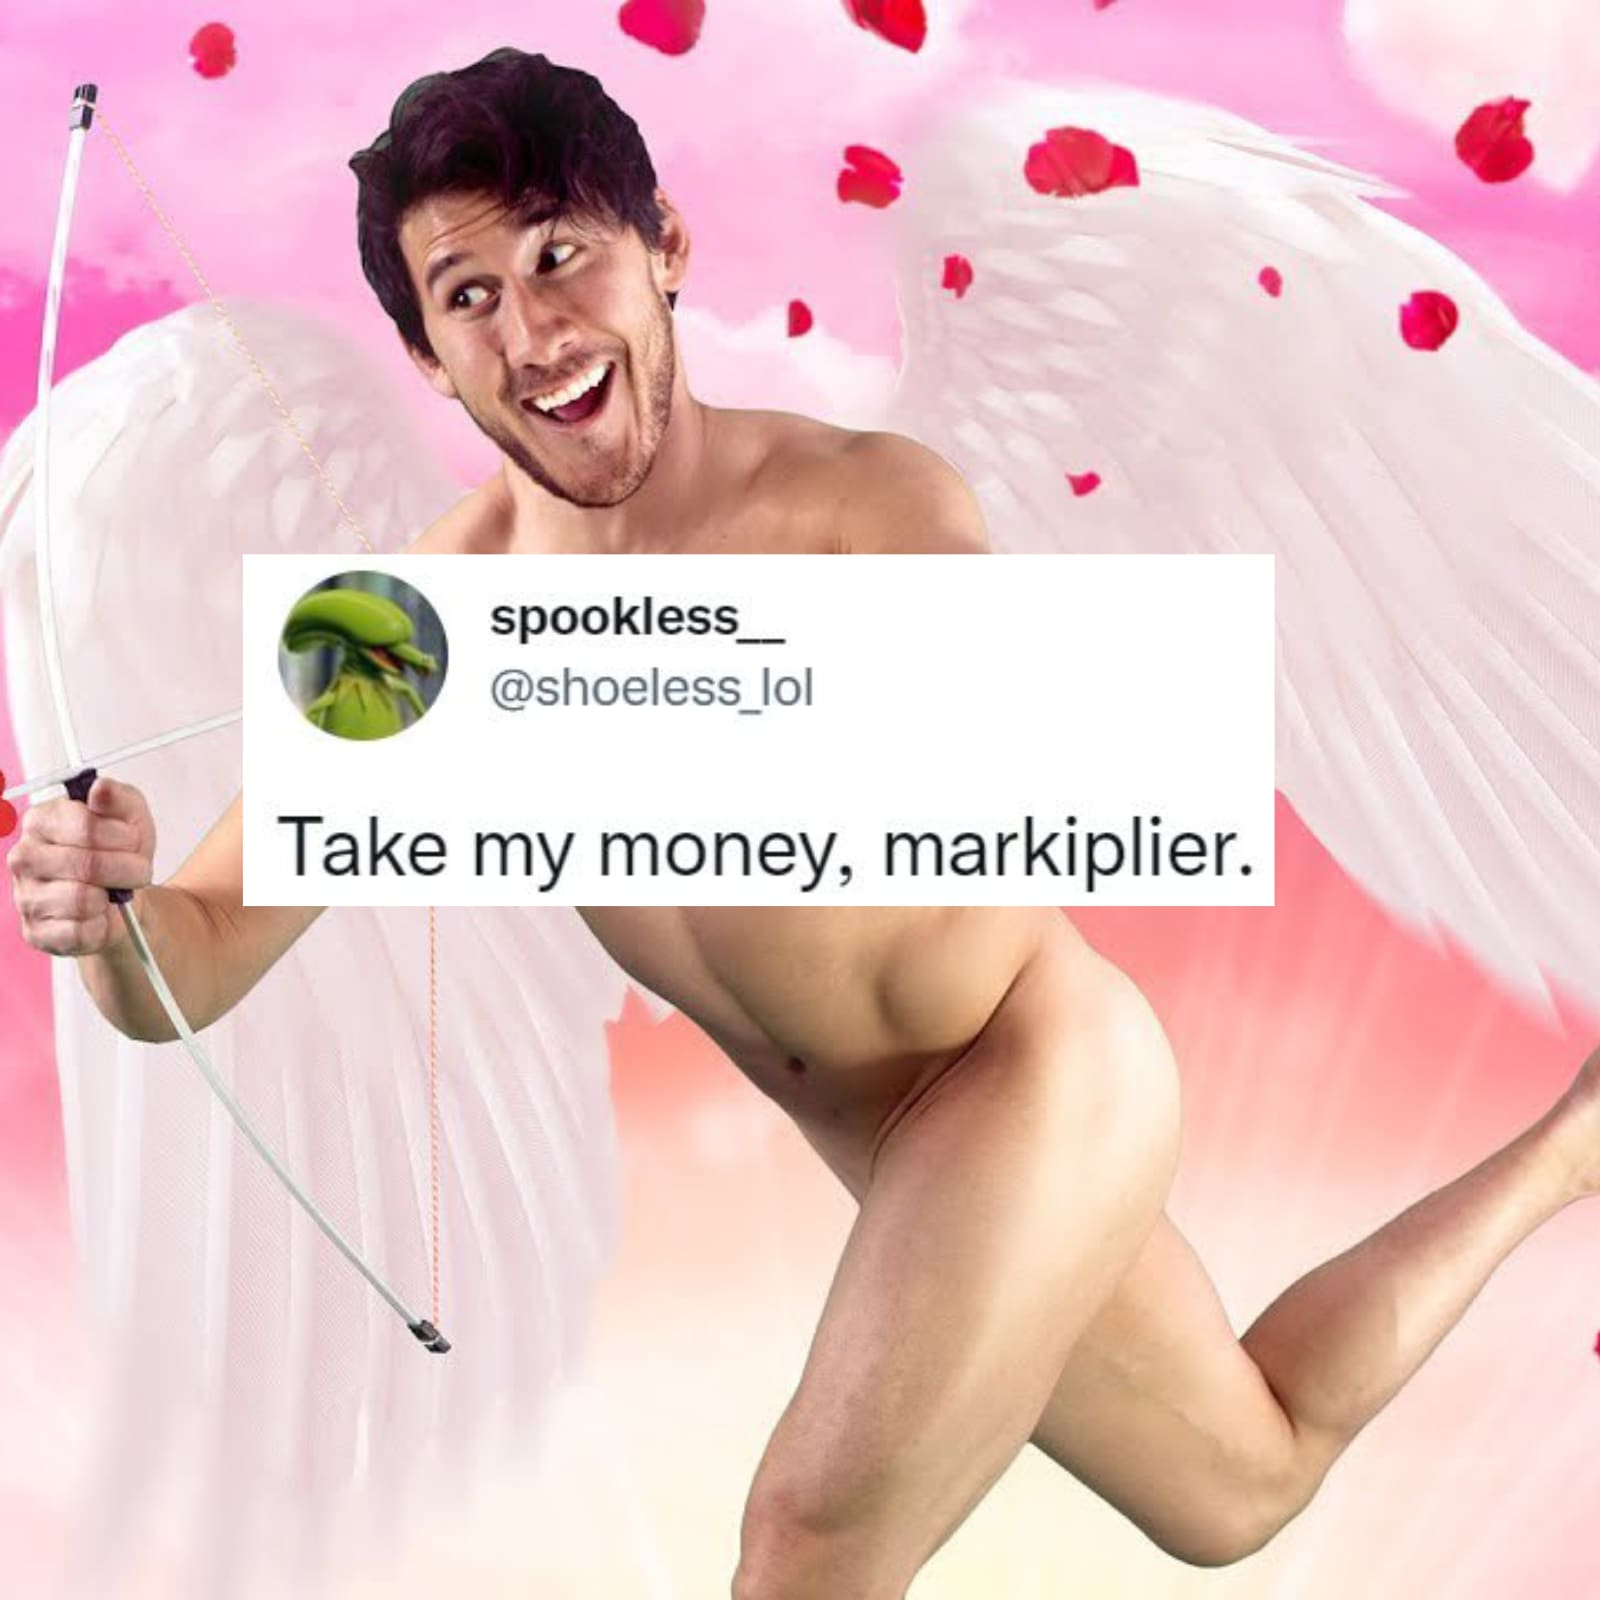 How much did markiplier make on only fans